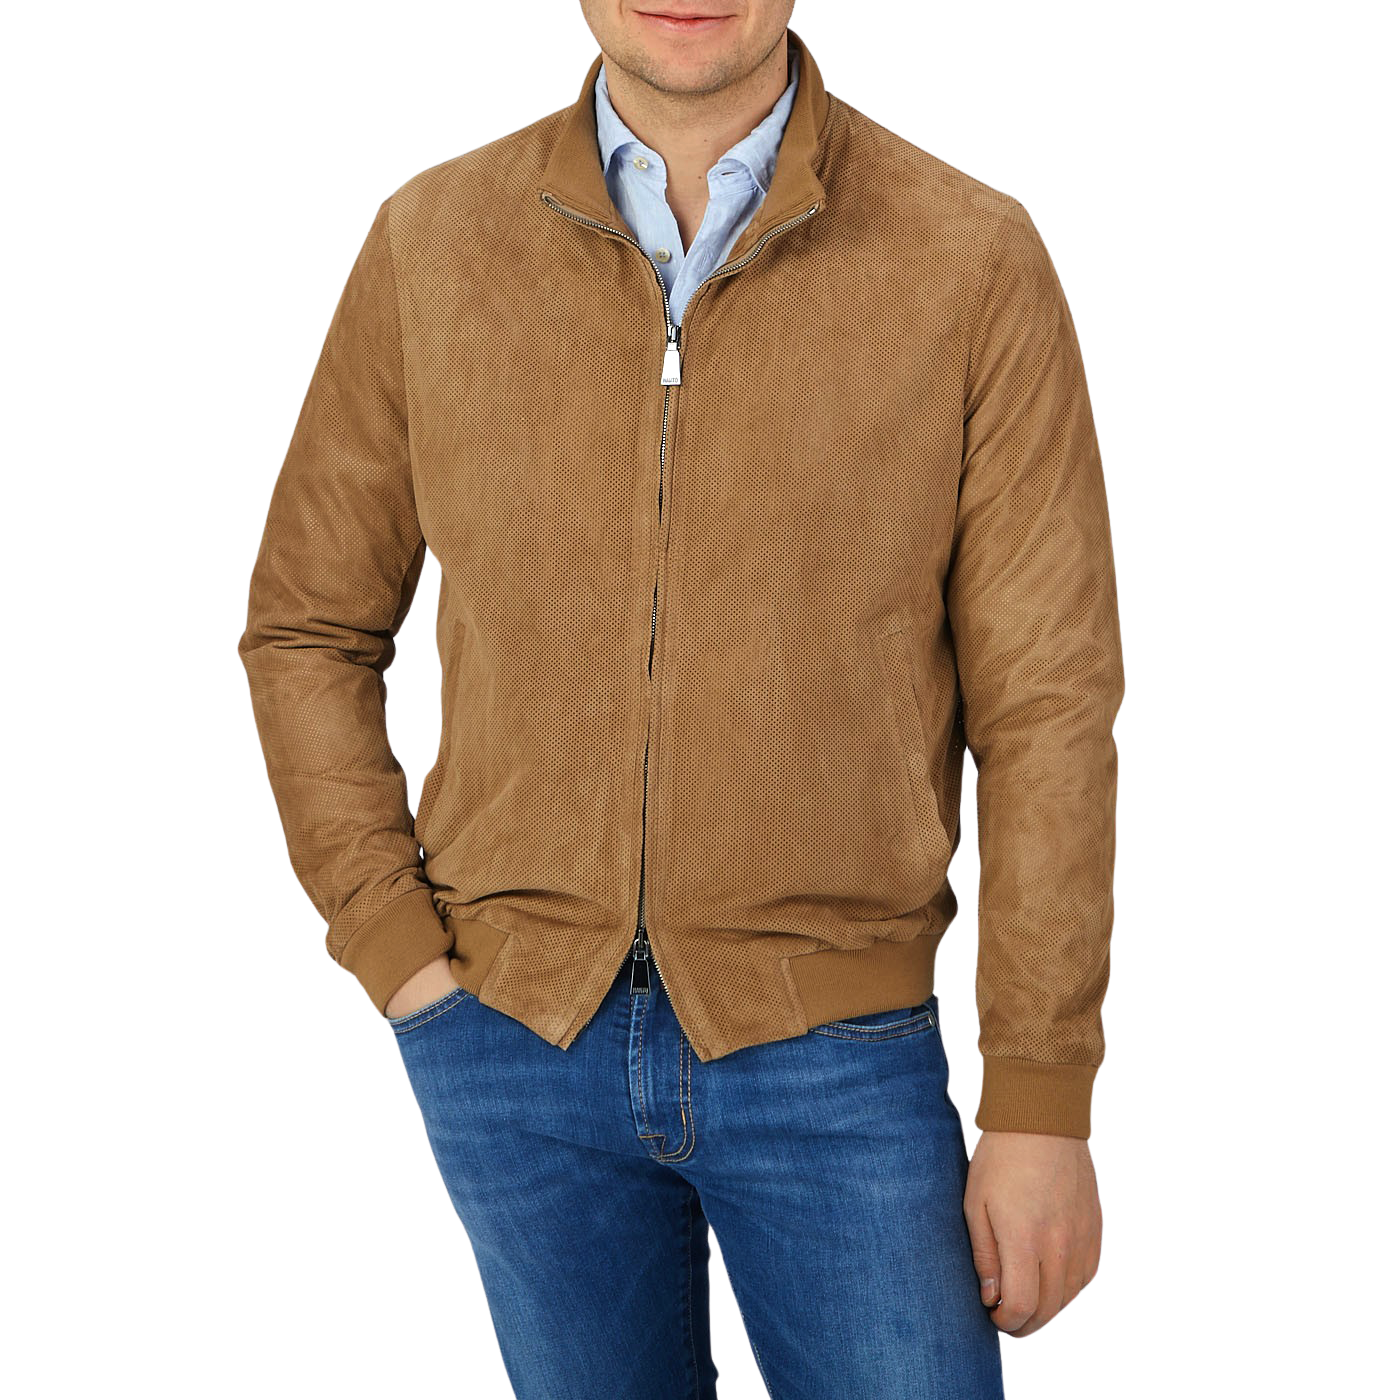 A man wearing a Manto Tobacco Brown Perforated Suede Leather Blouson.